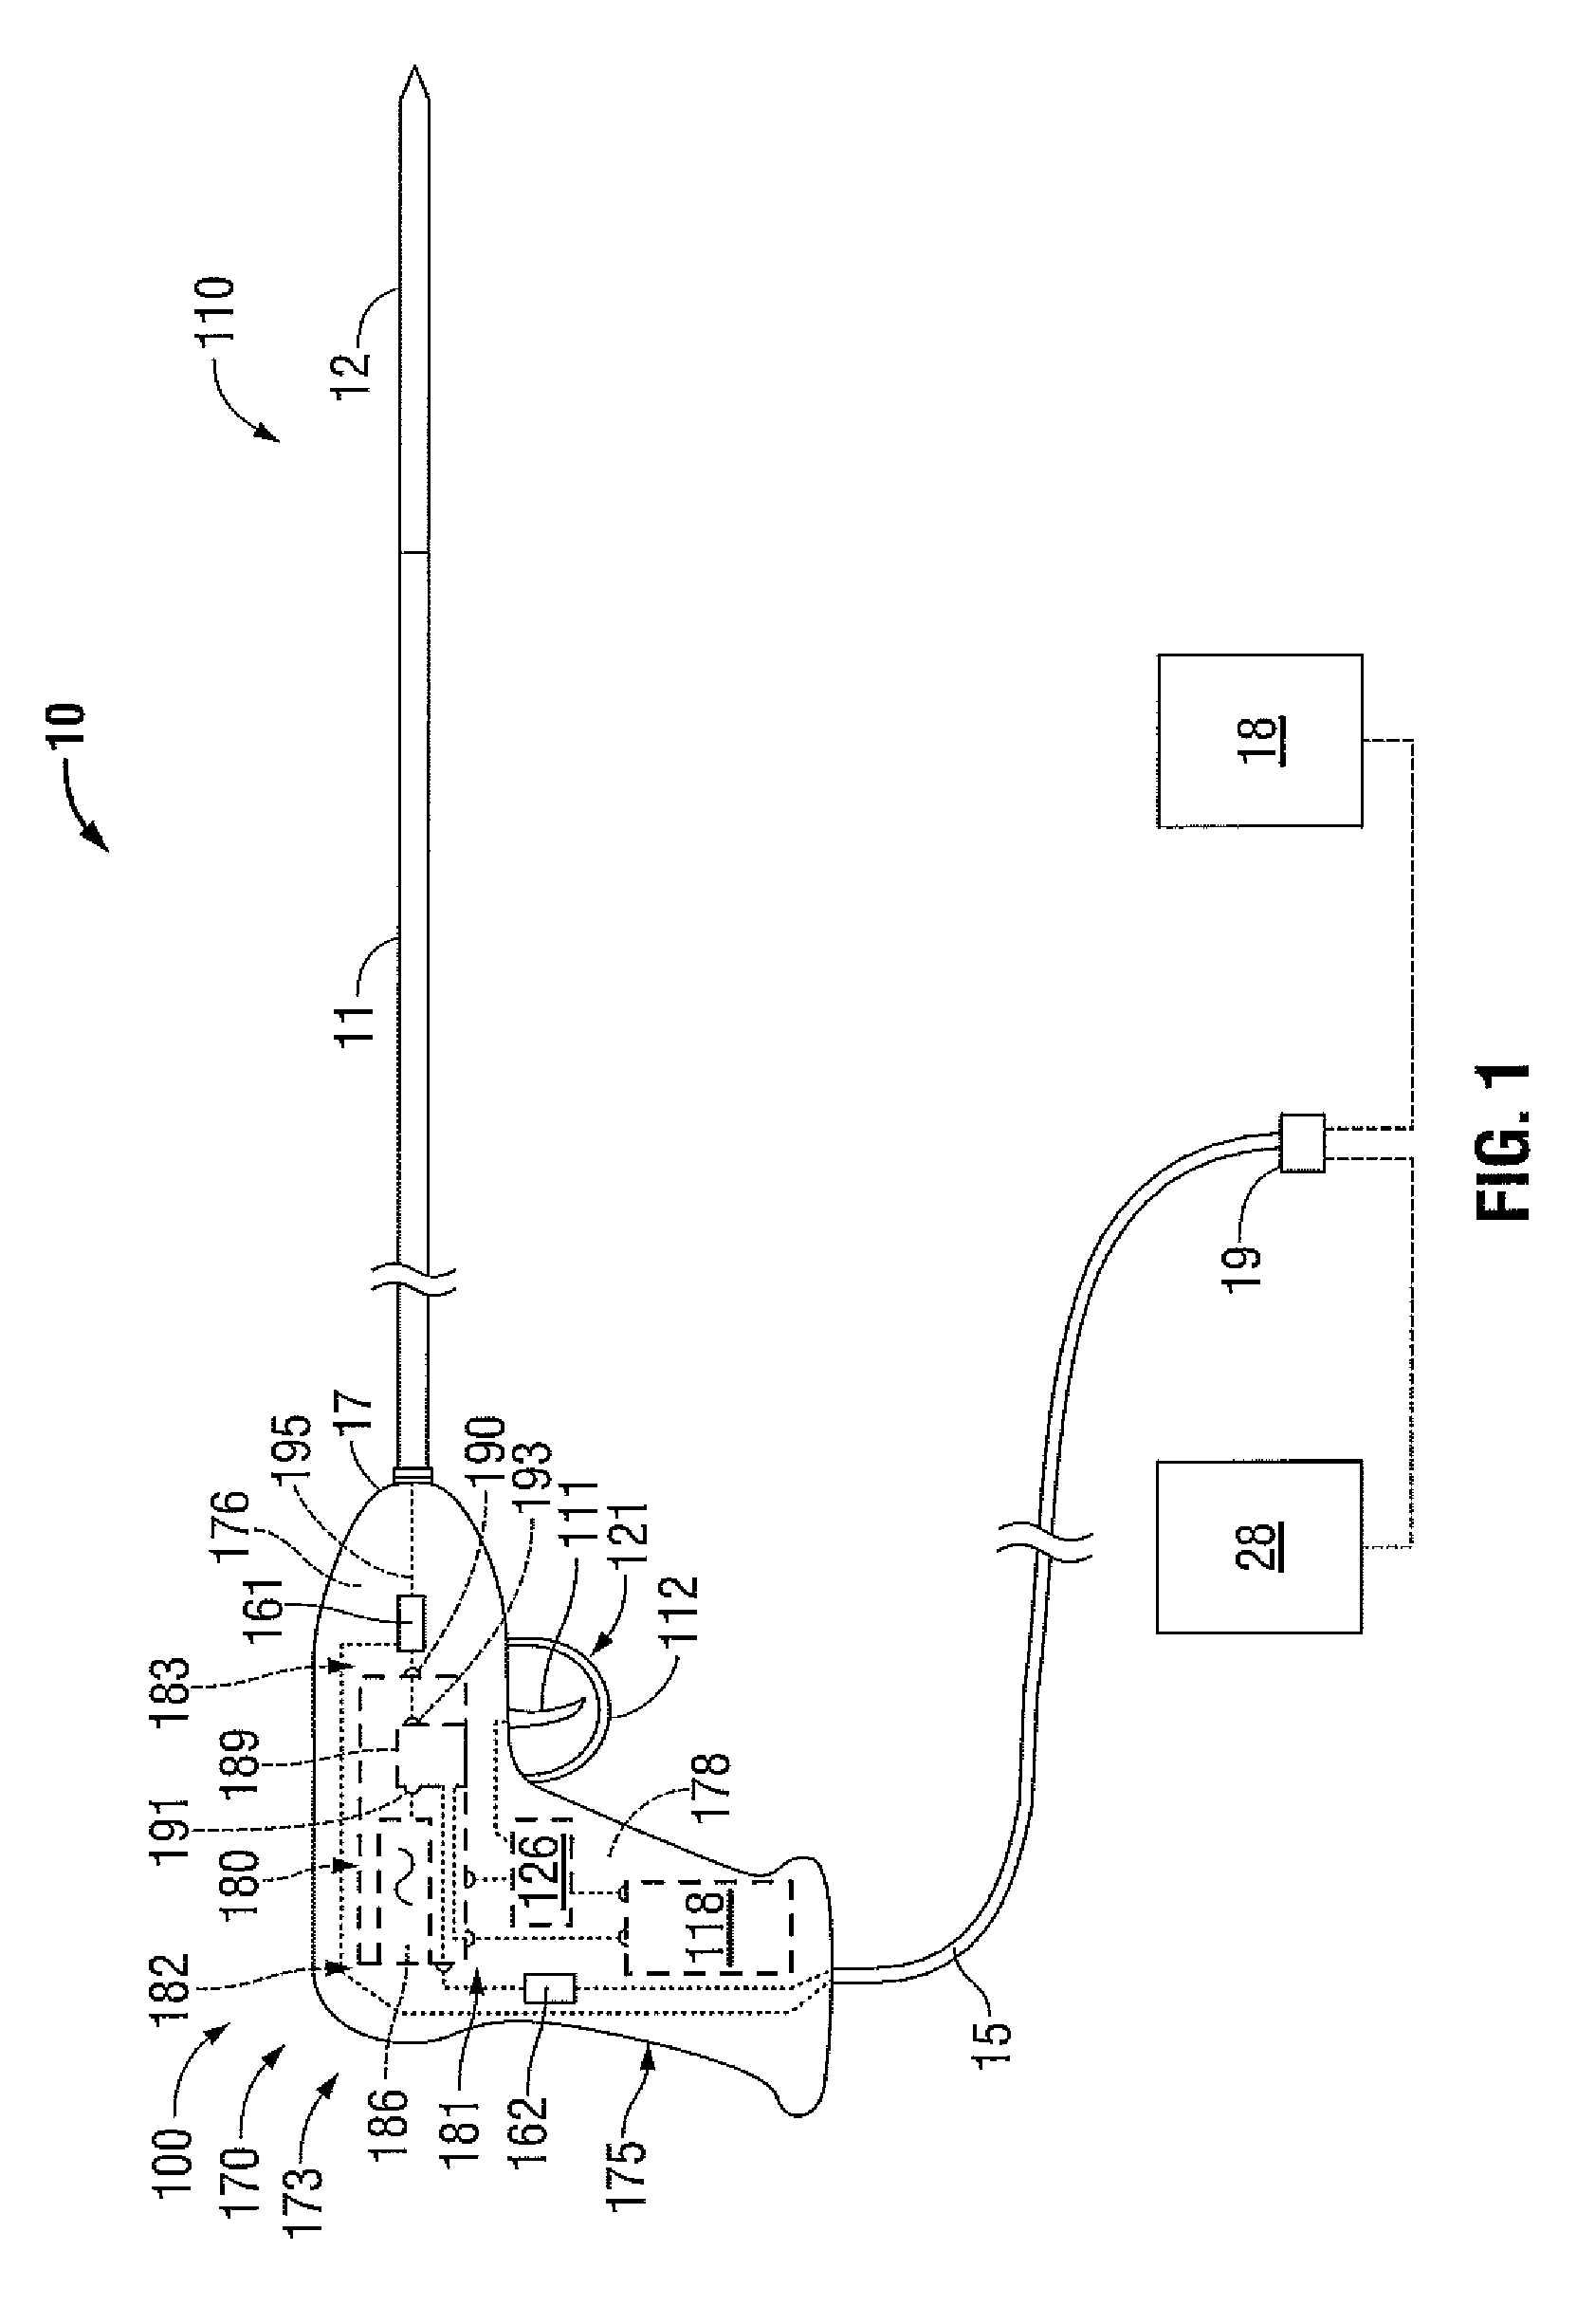 Handheld medical devices including microwave amplifier unit at device handle